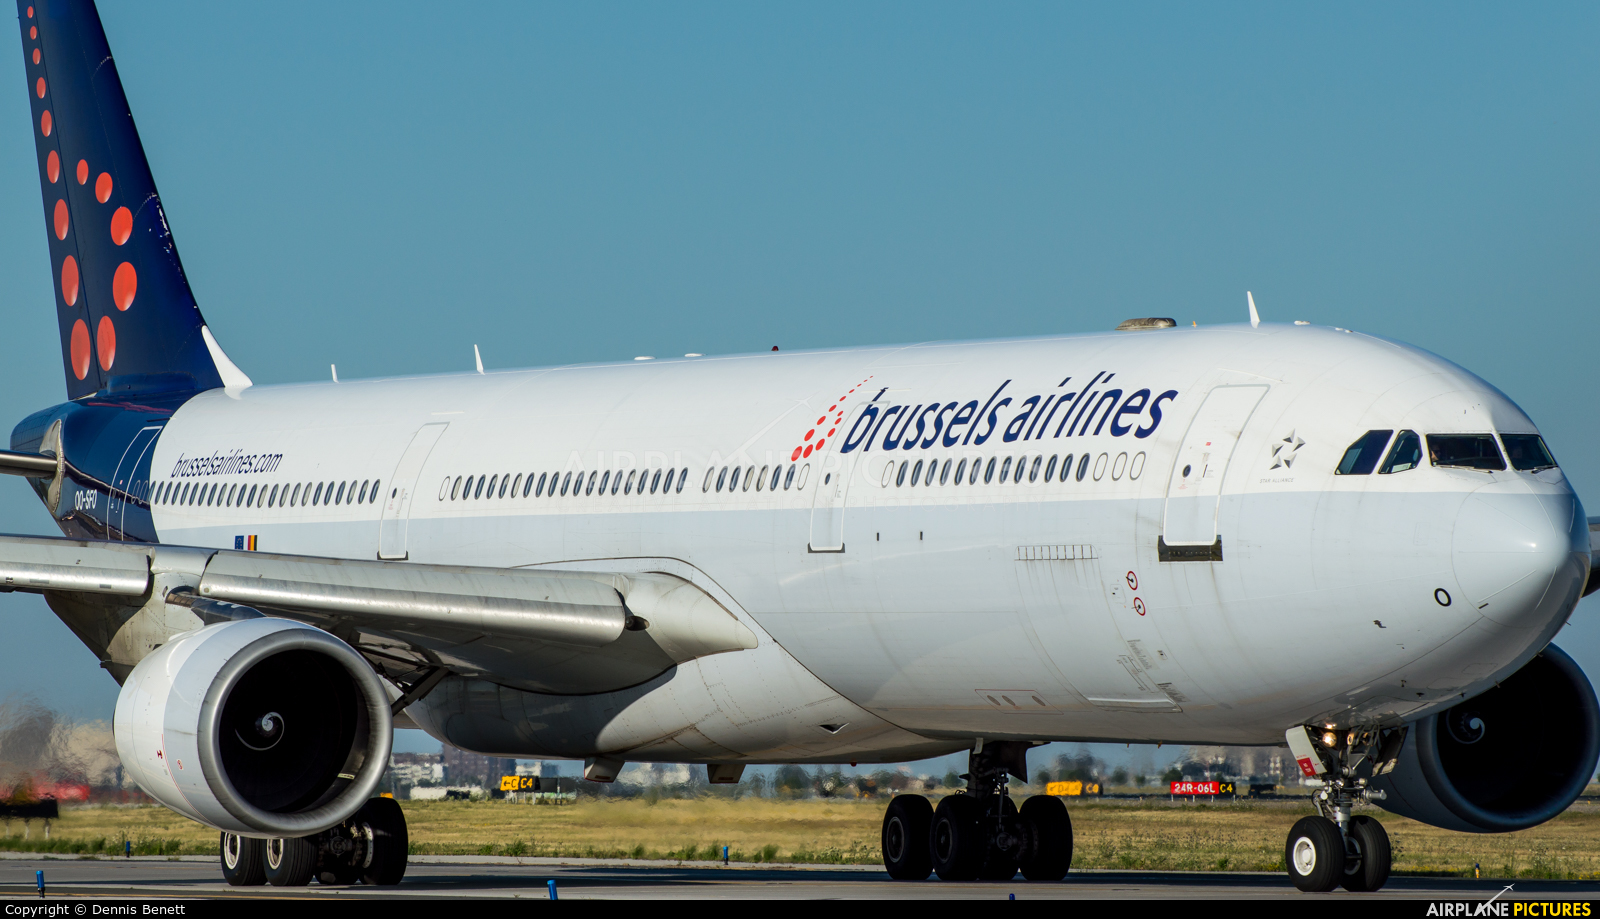 Oo Sfo Brussels Airlines Airbus A330 300 At Toronto Pearson Intl